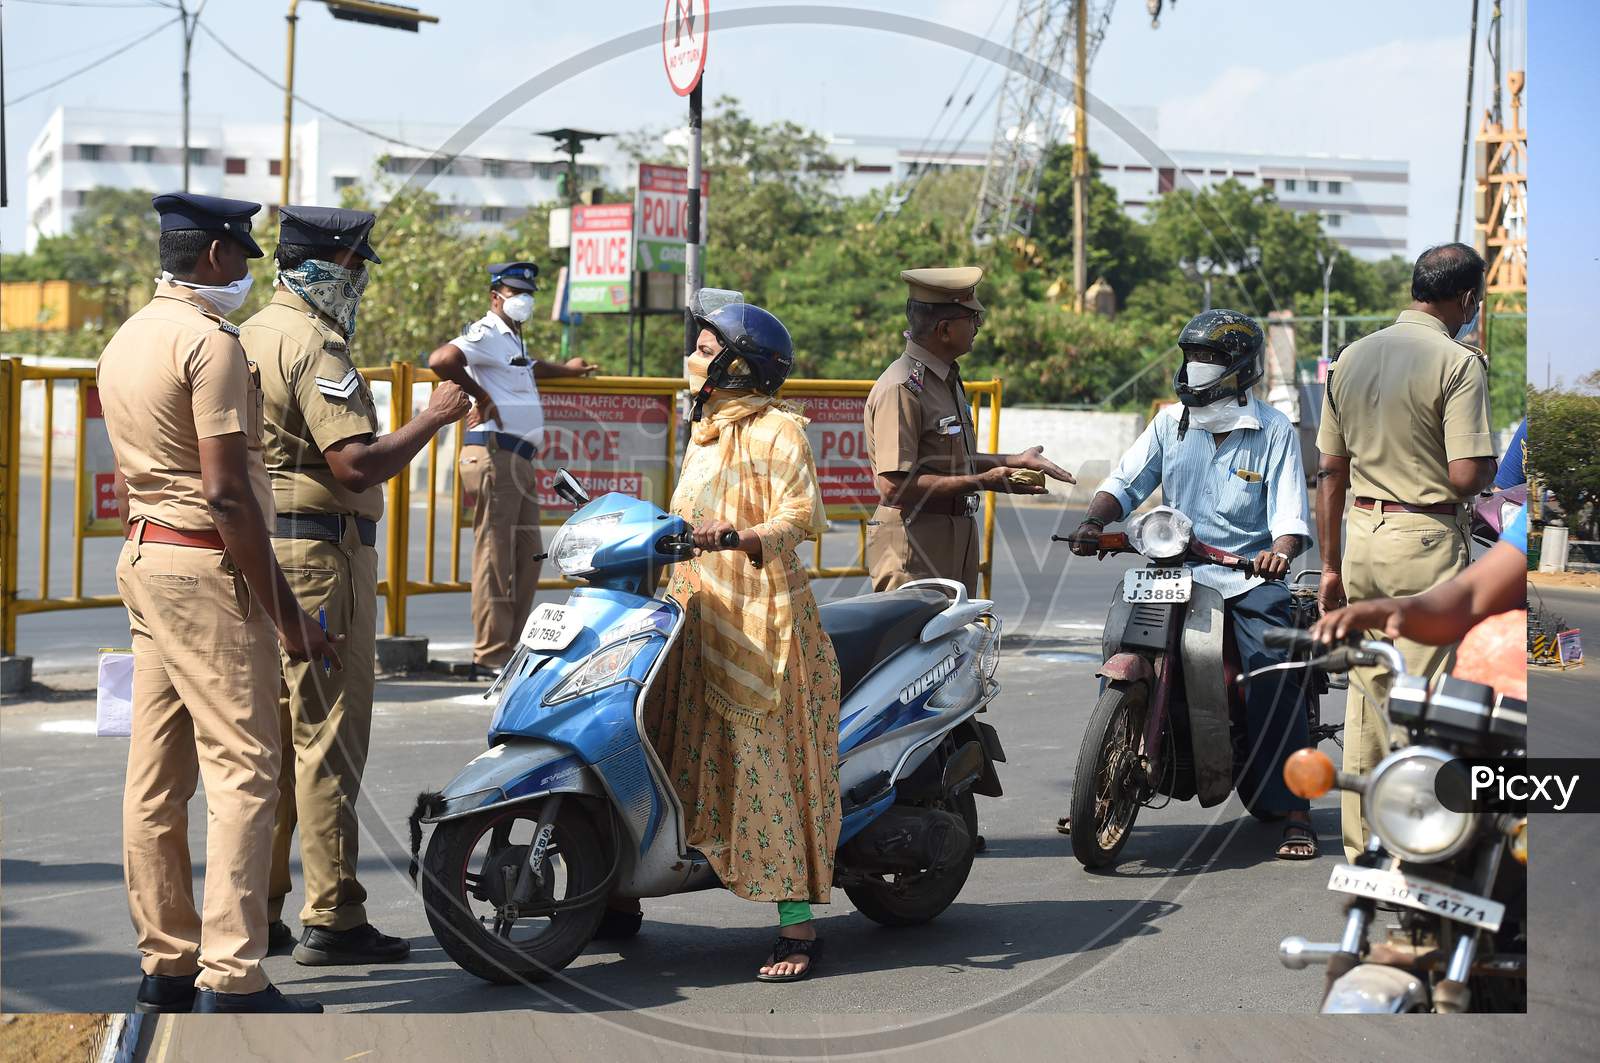 Commuters wait as a police personnel checks for valid travel credentials after a lockdown was reimposed as a preventive measure against the spread of the COVID-19 coronavirus, in Chennai on June 19, 2020. The epidemic has badly hit India's densely populated major cities and Chennai in the south has